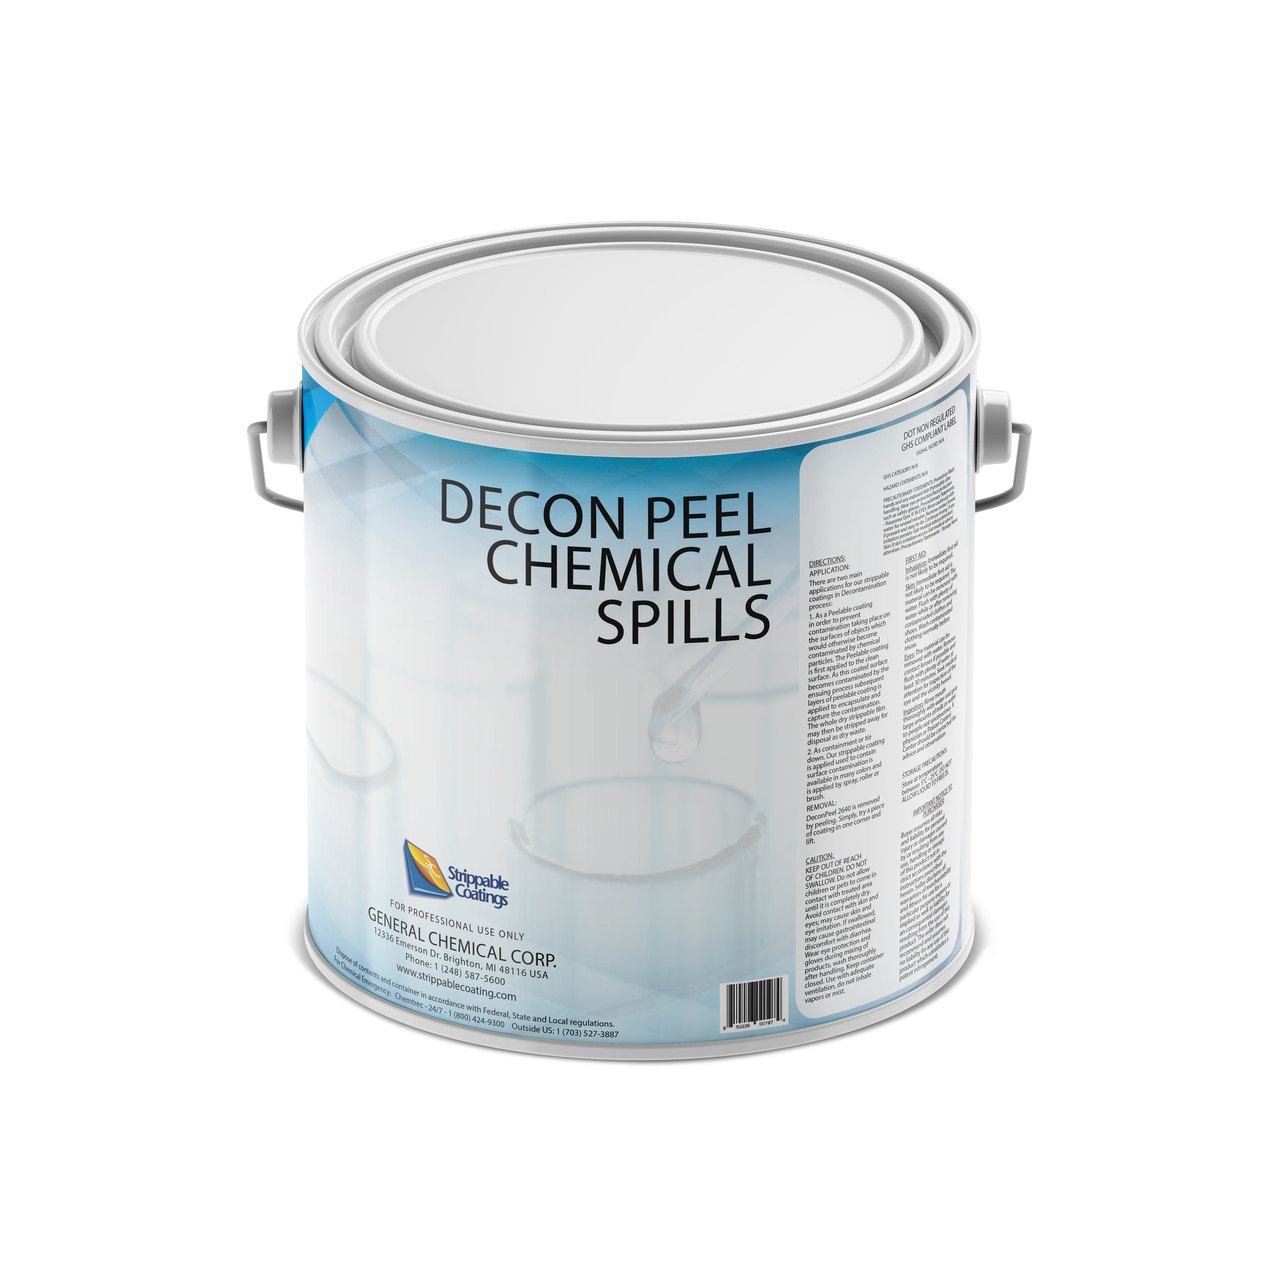 DeconPeel 5900 for Chemical Spill Clean Ups | GeneralChem